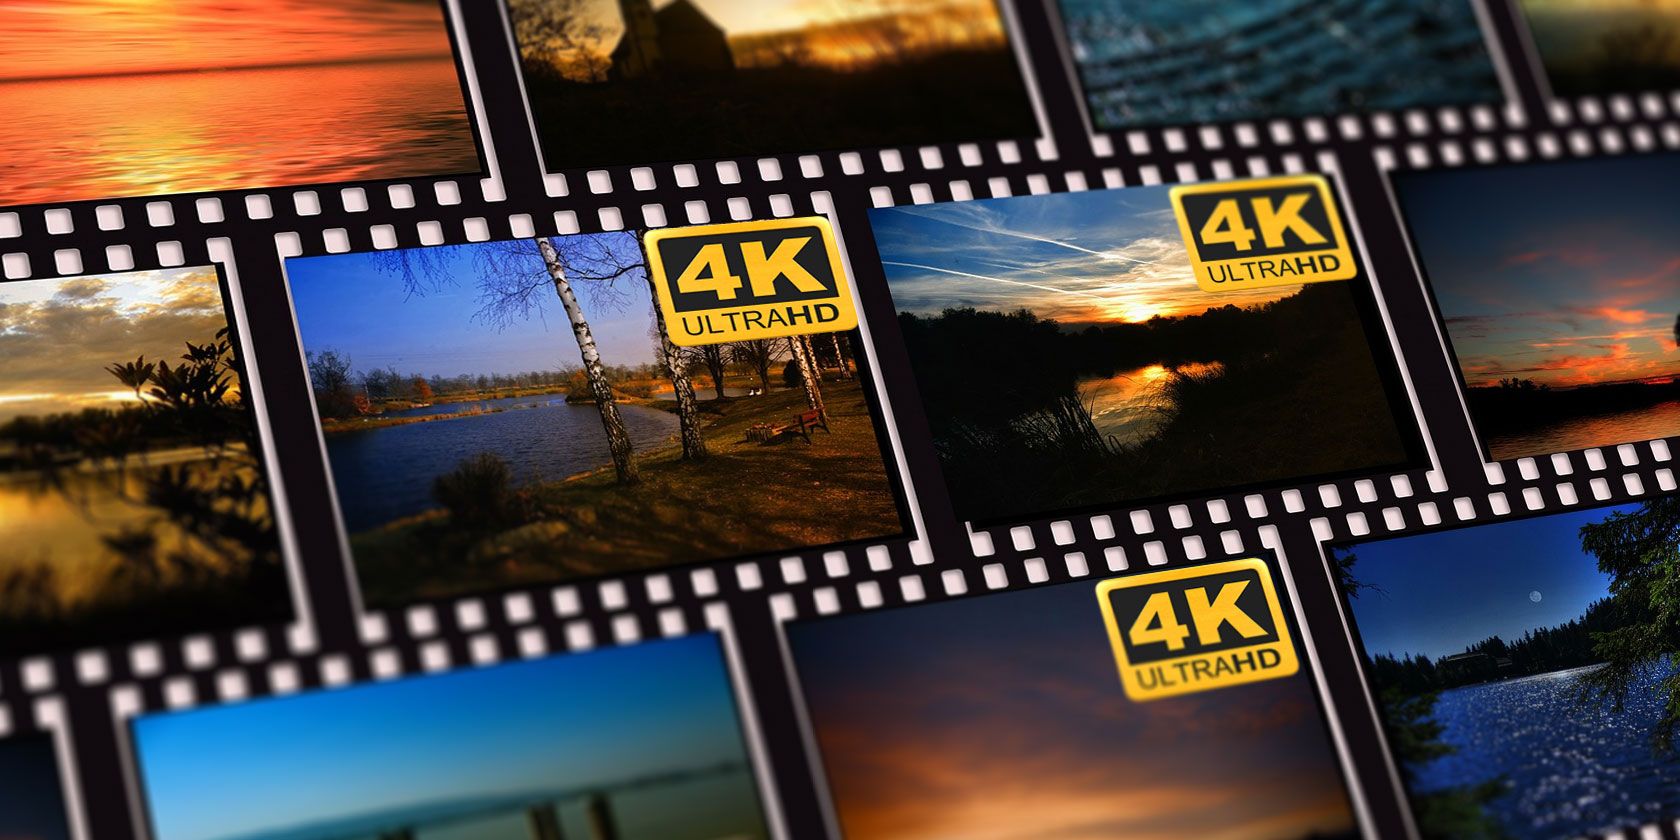 4k Stock Video Footage for Free Download